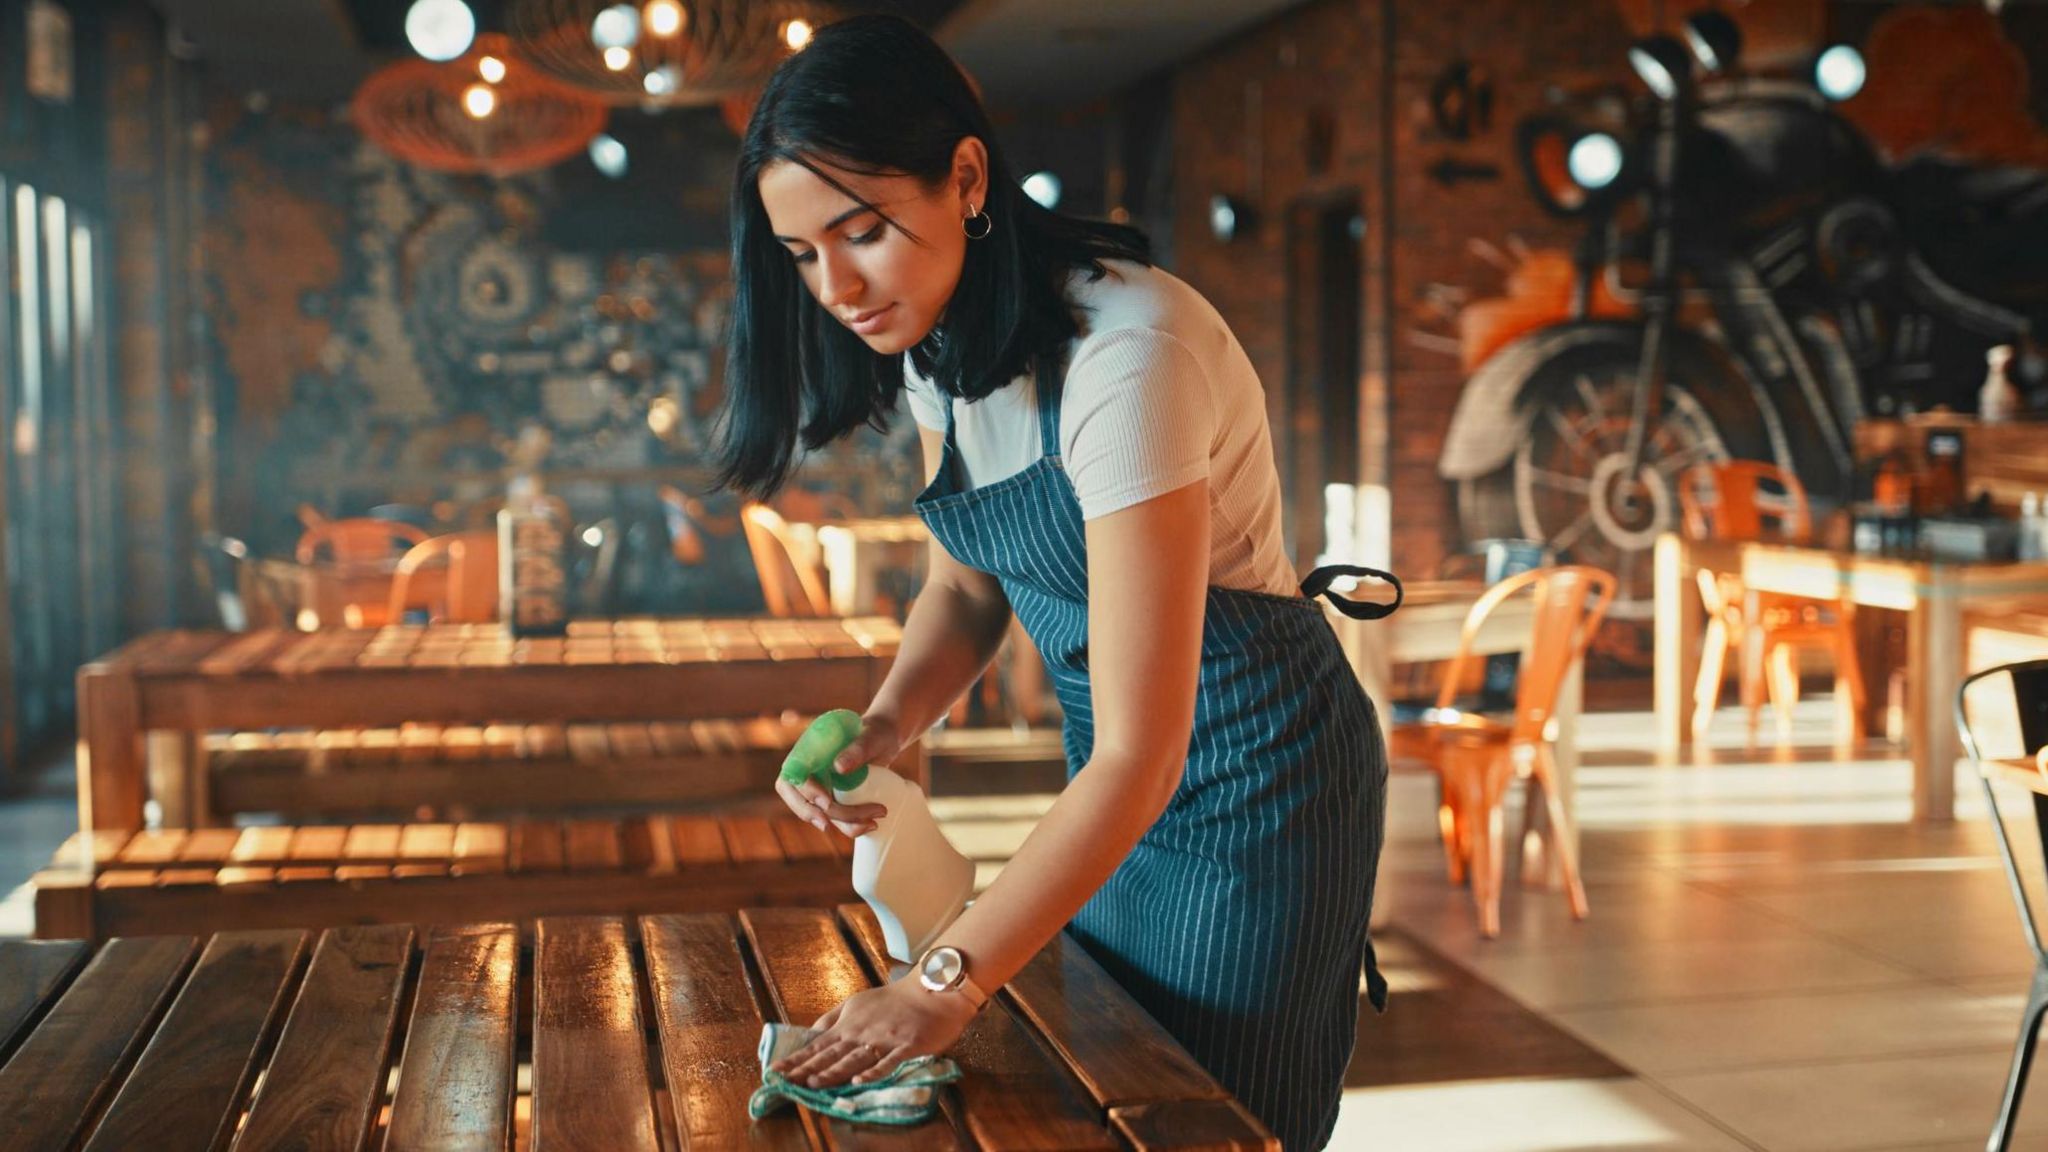 A young woman with dark hair working in cafe, cleaning a table